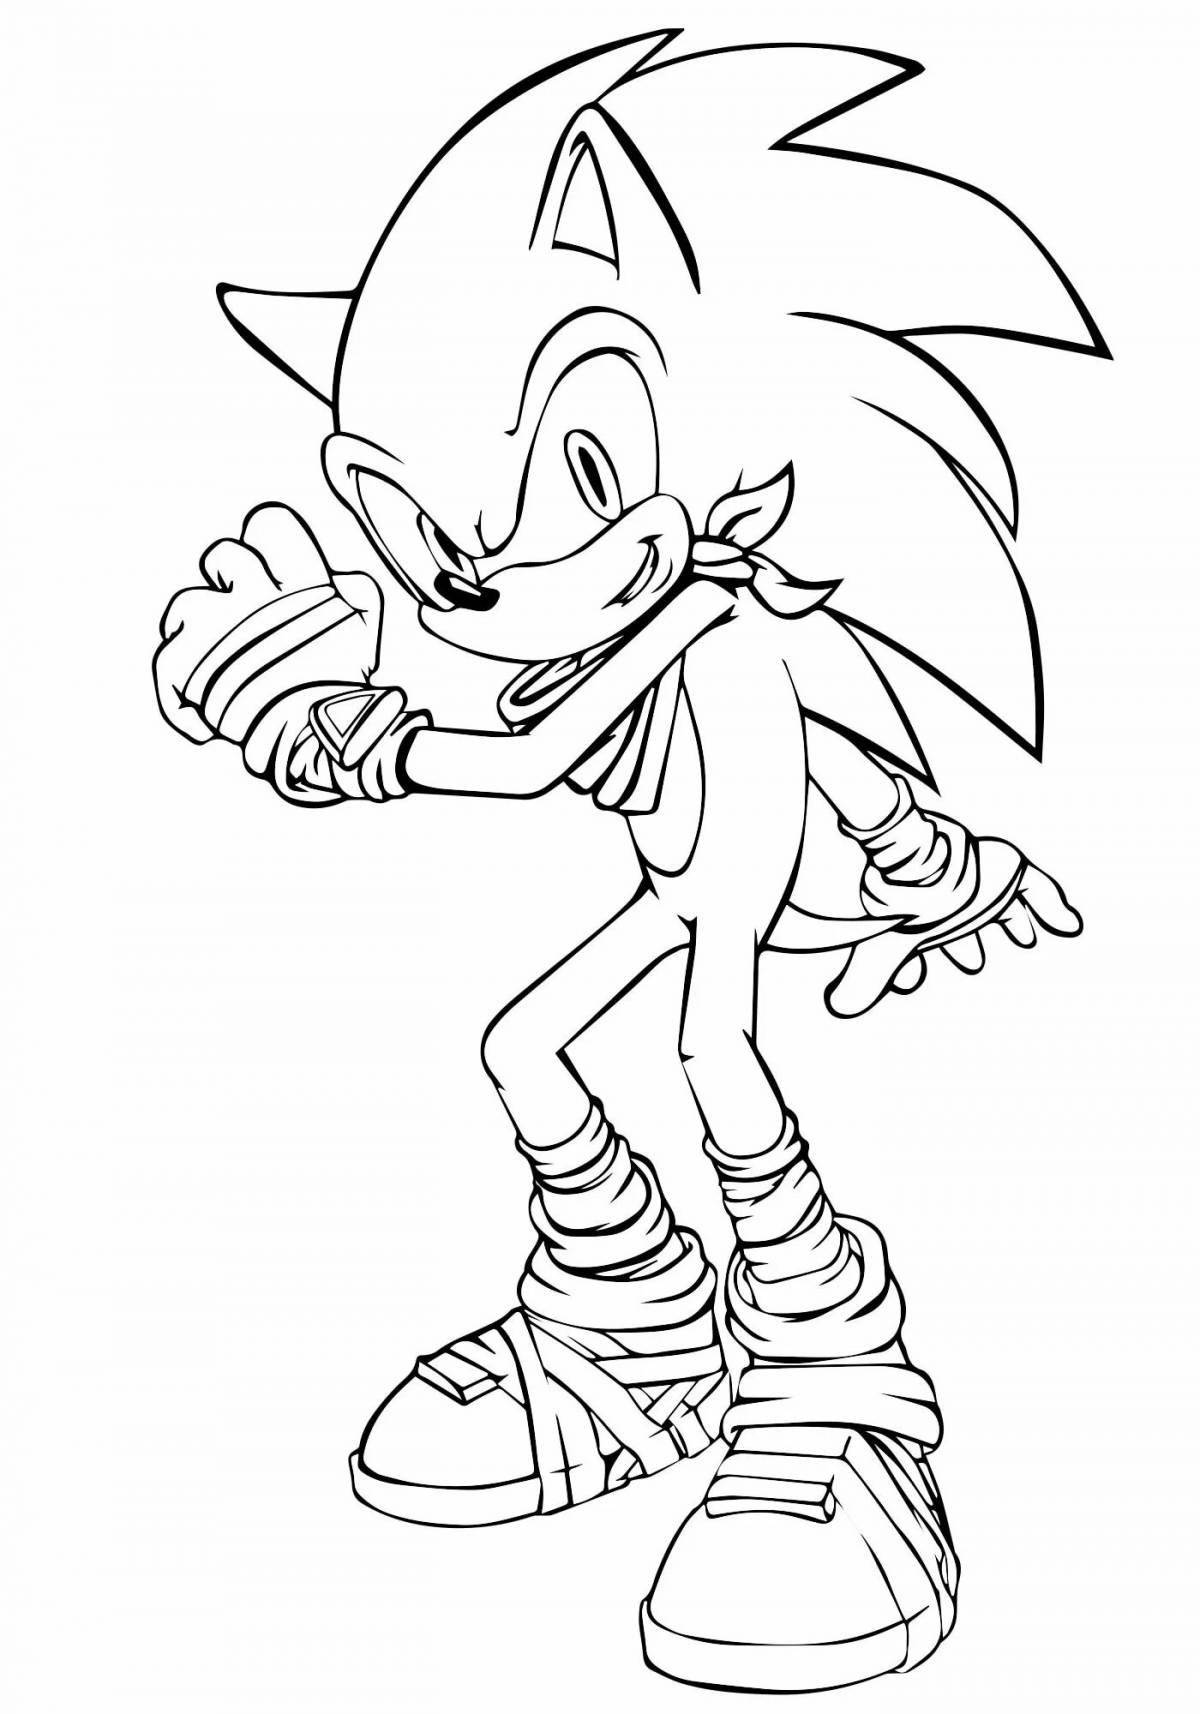 Delightful sonic coloring book for kids 5-6 years old